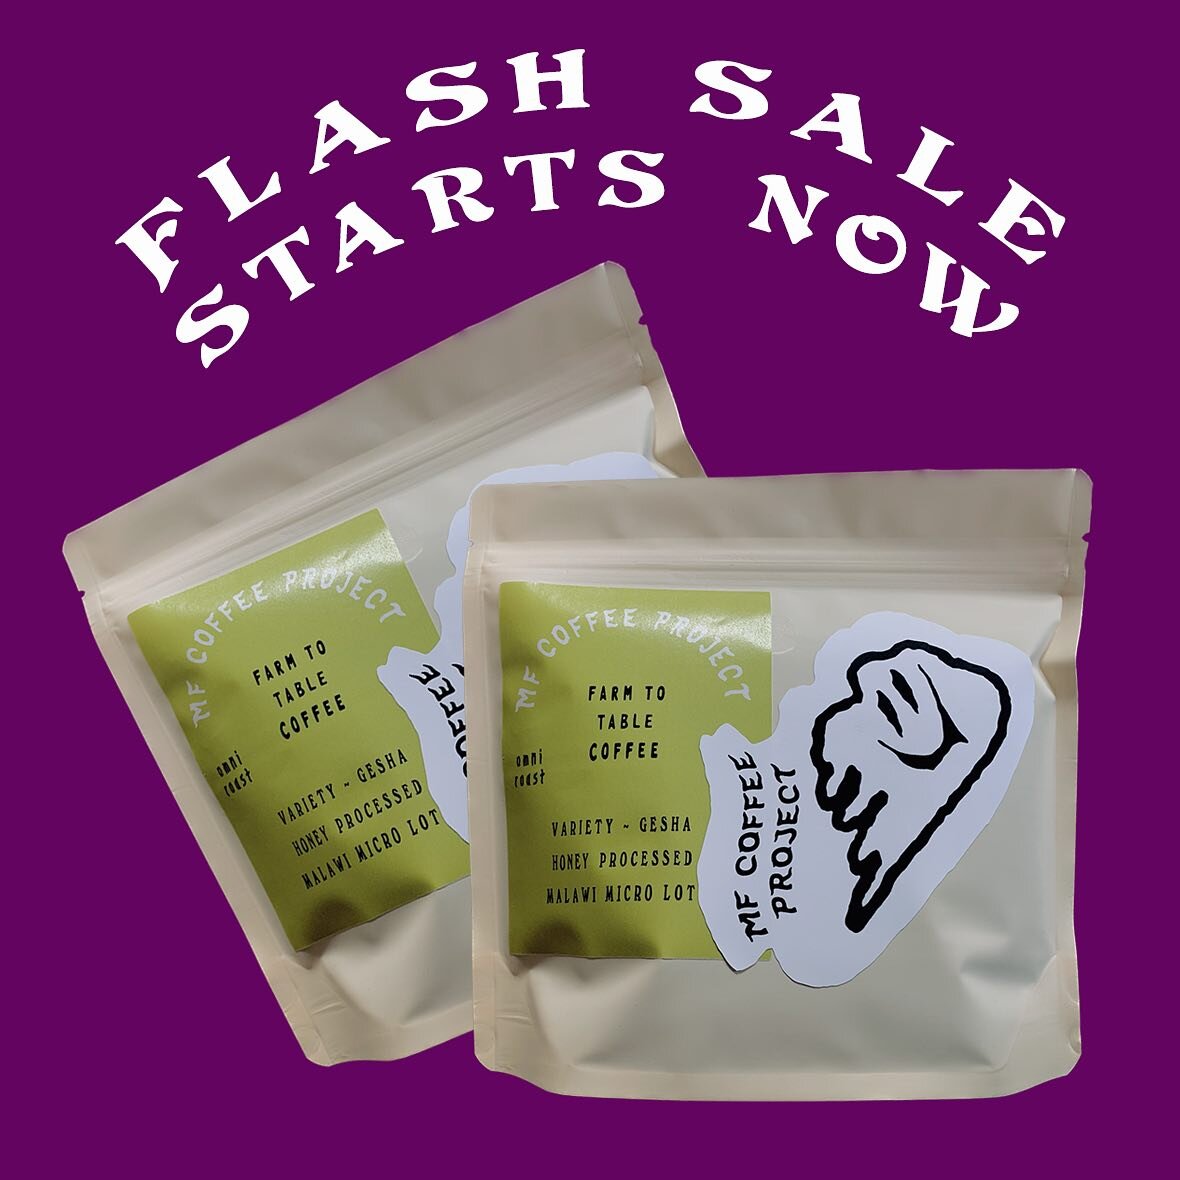 🌟 Flash Sale Starts Now till the End of Monday! Not an April Fools&rsquo; Day Joke. 🌟

🌷 From now until Monday, April 1st, at 11:59 PM, enjoy a whopping 50% OFF on all our coffee online (excluding subscriptions)! It&rsquo;s our way of celebrating 